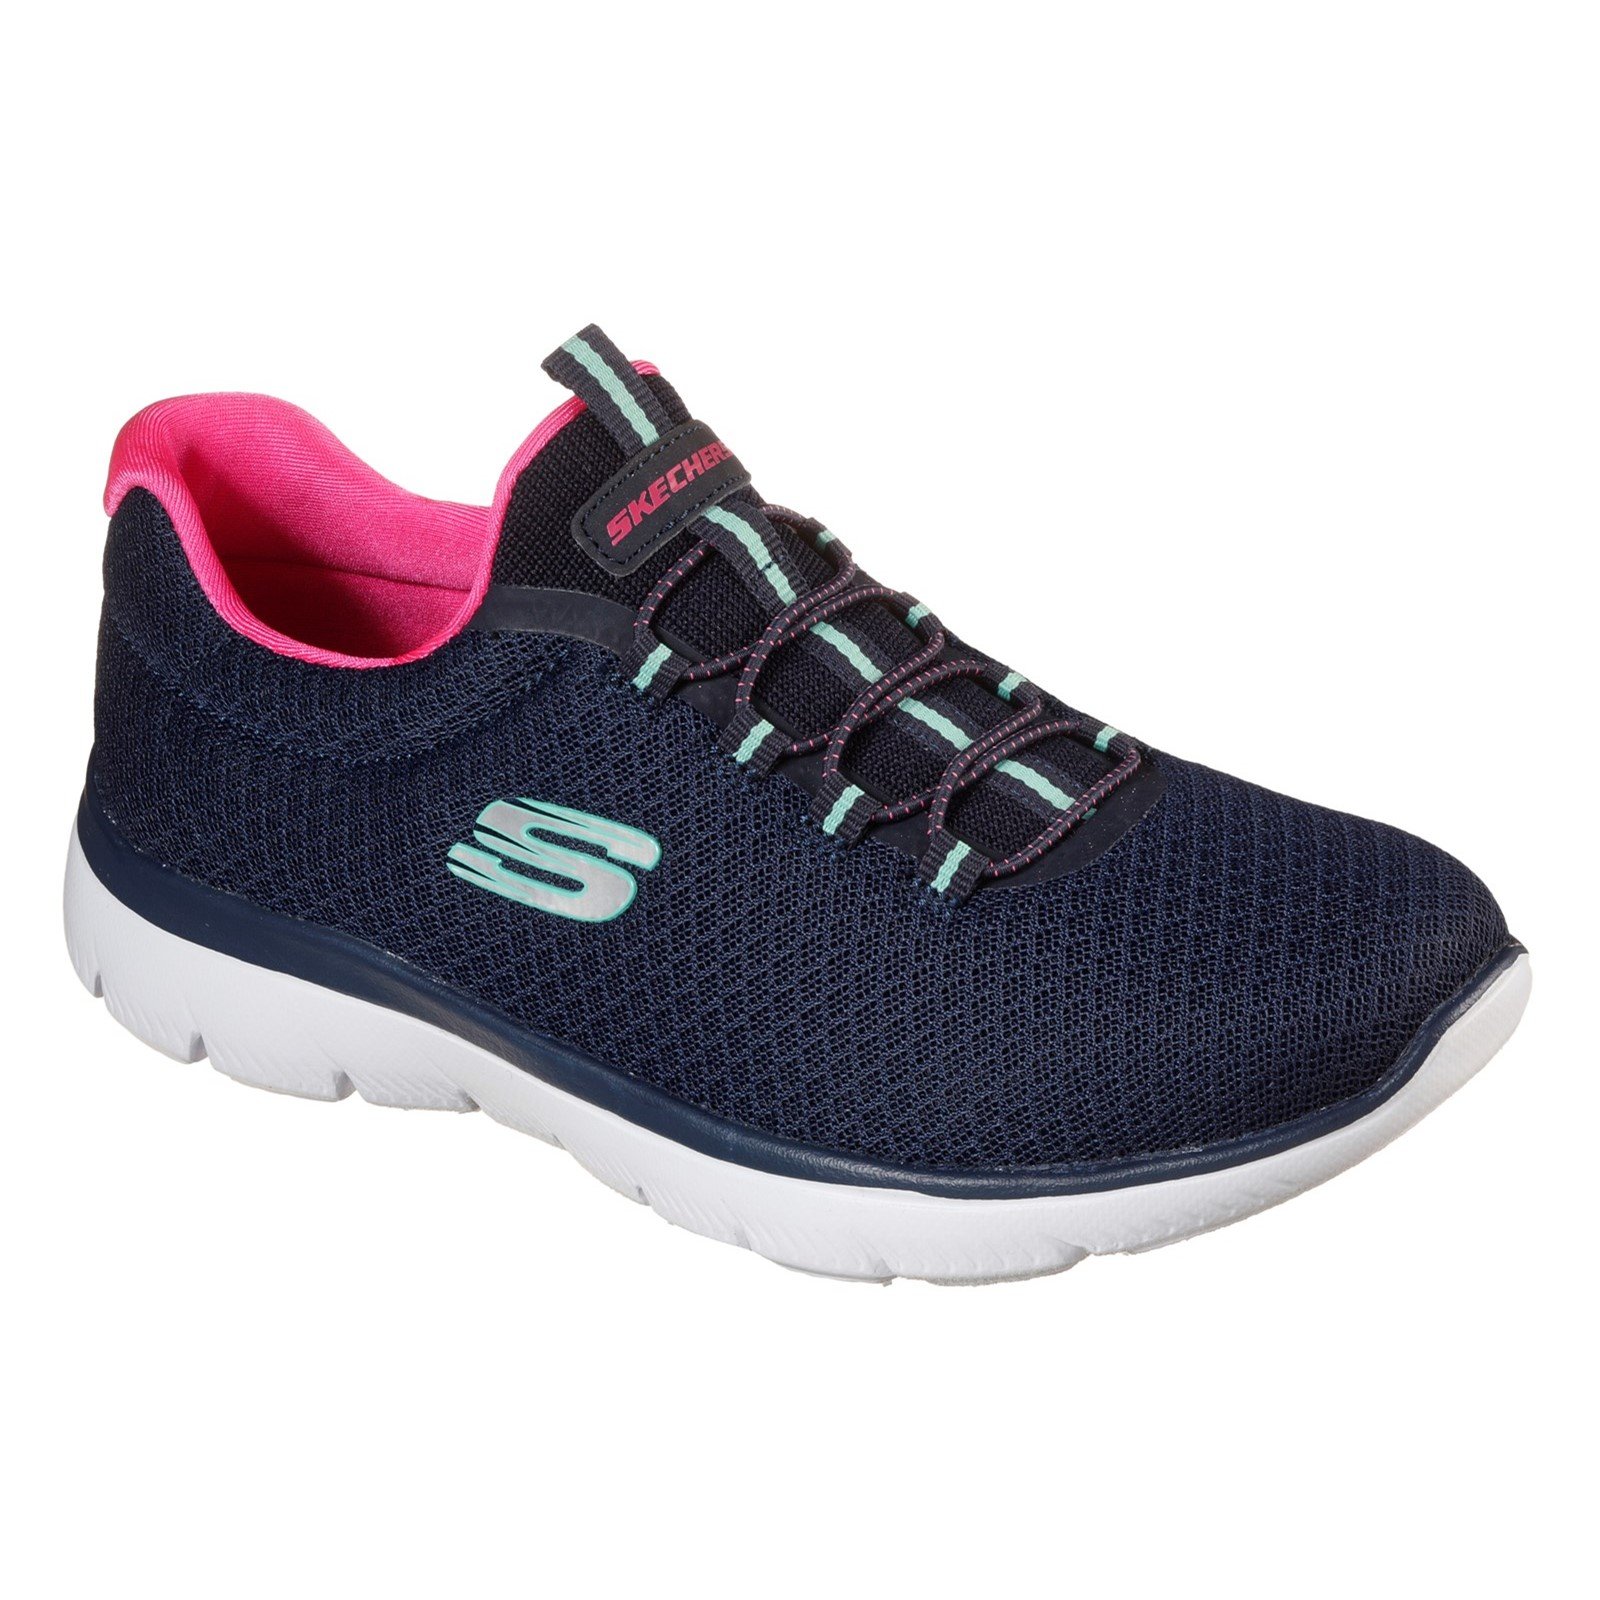 Skechers Women's Summits Slip On Trainer Various Colours 30708 - Navy/Hot Pink 5